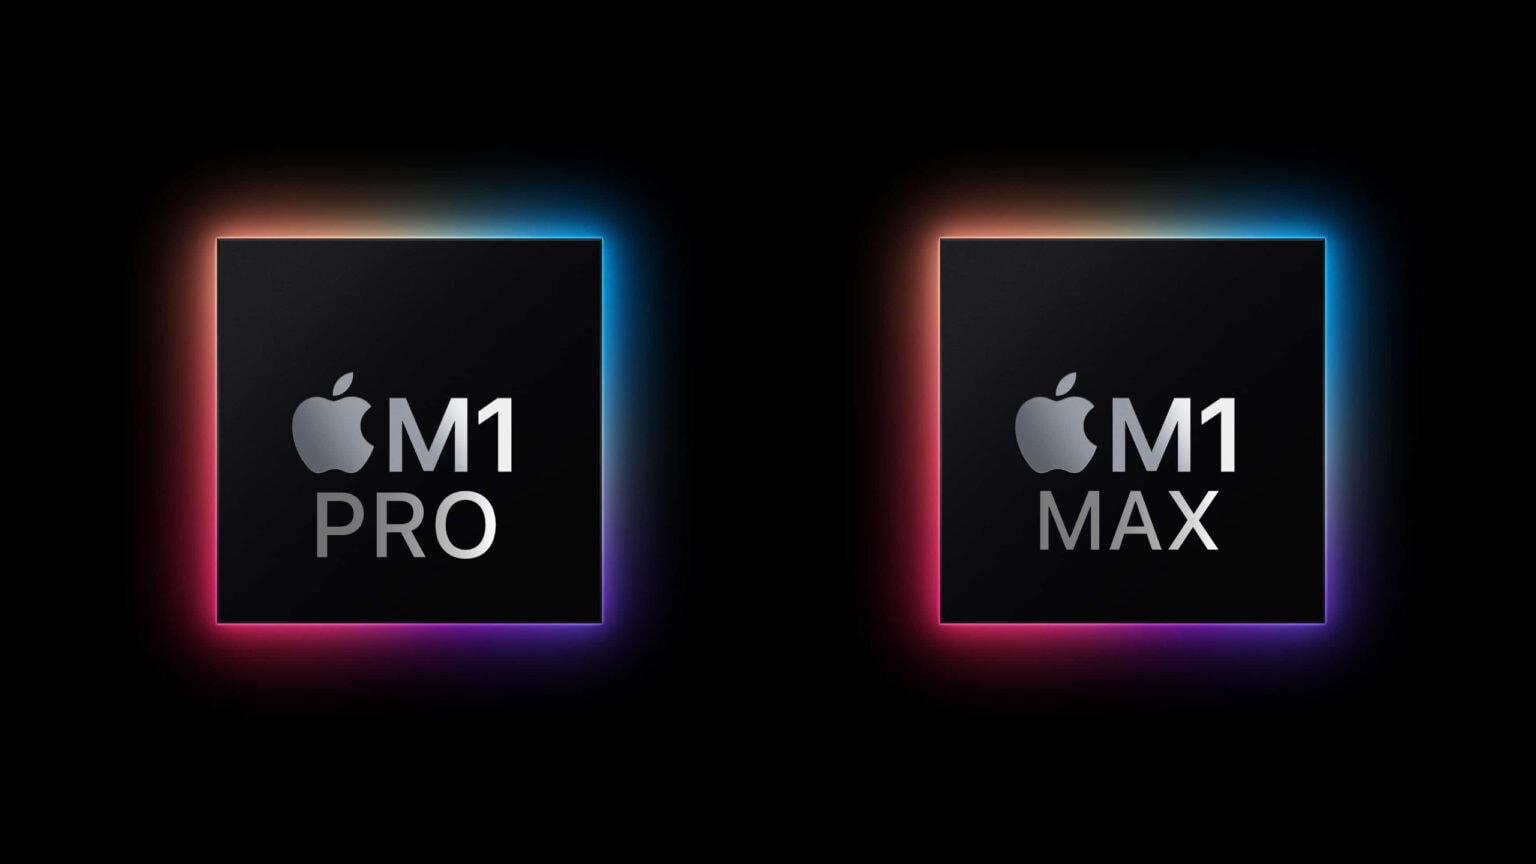 Apple M1 Max and M1 Pro chips